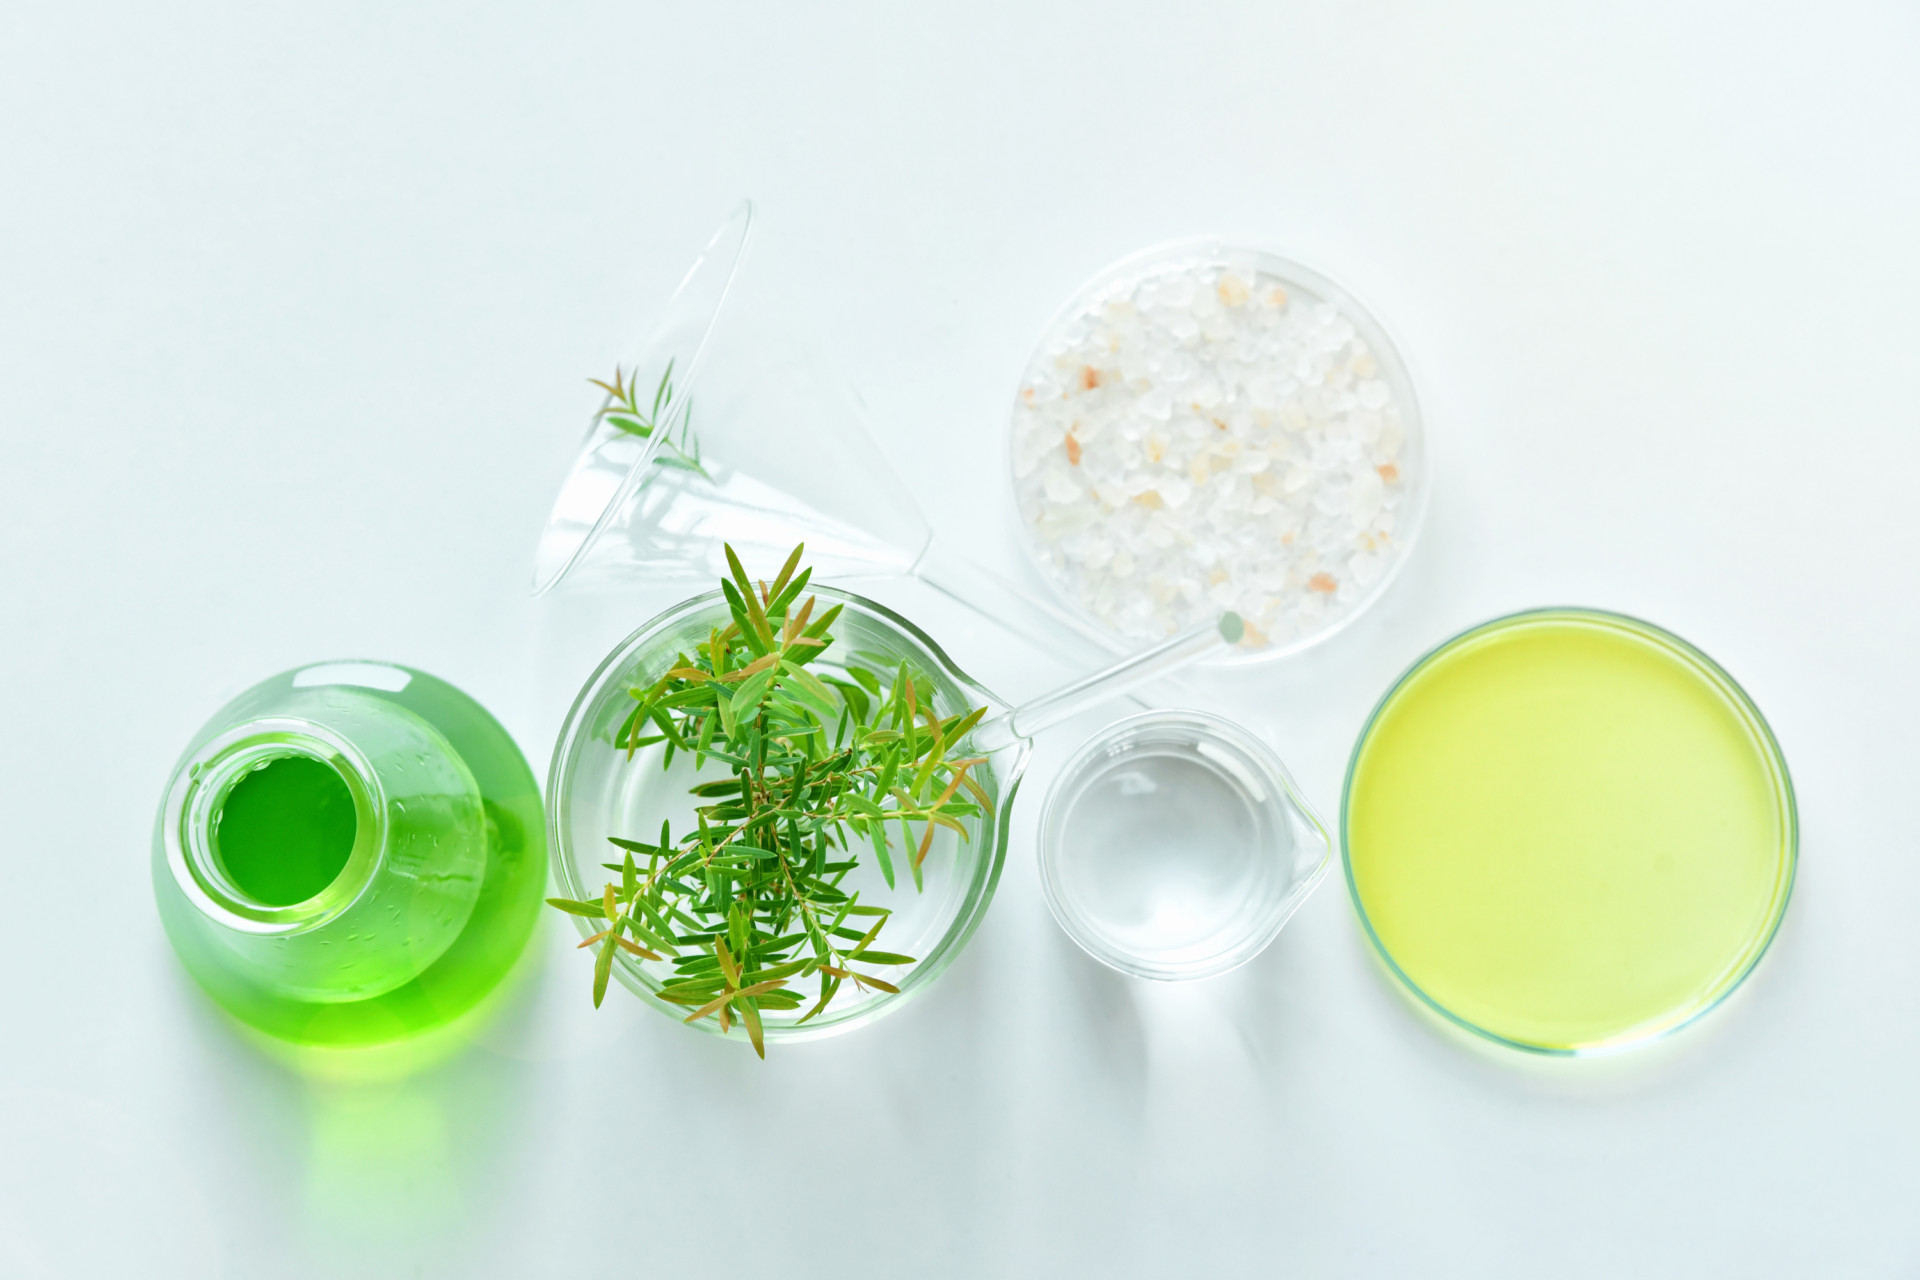 Natural organic botany and scientific glassware, Alternative herb medicine, Natural skin care cosmetic beauty products, Research and development concept.